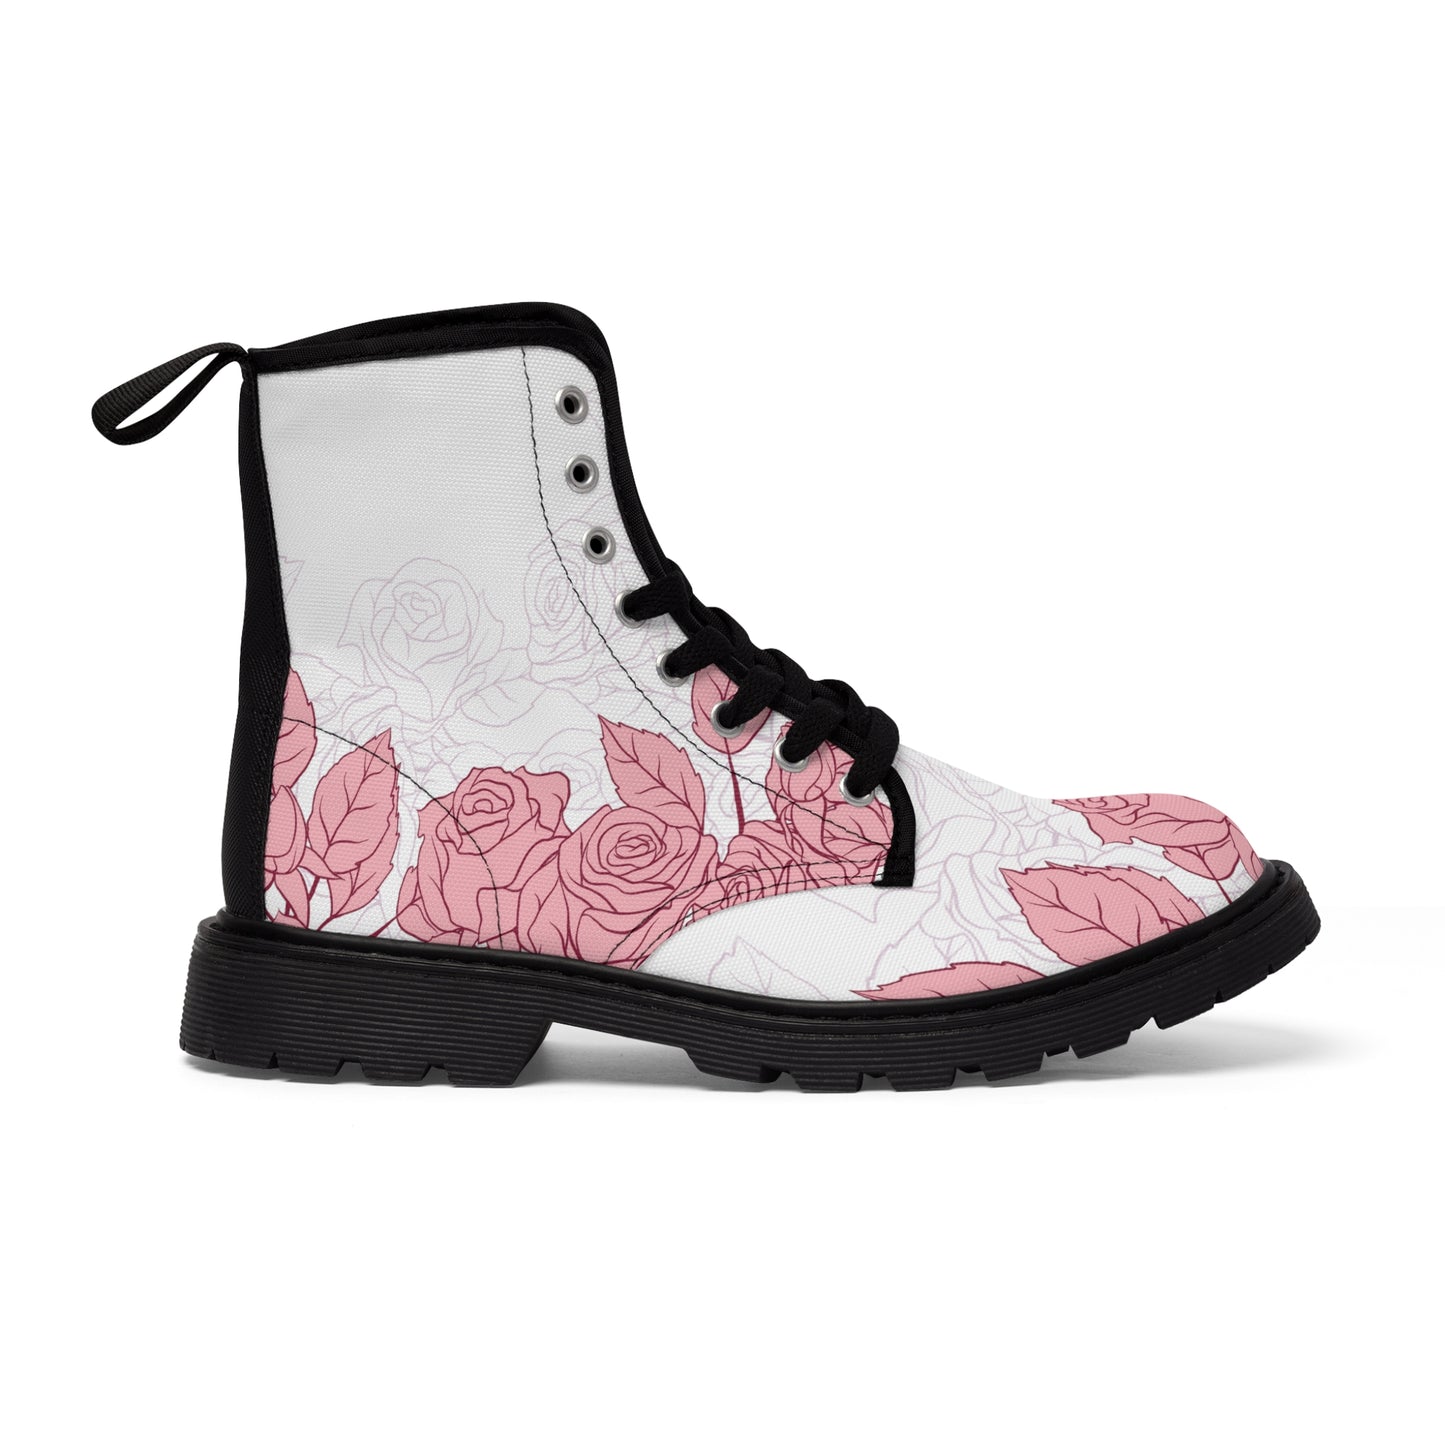 WOMEN'S CANVAS HIGH TOP BOOTS, PINK ROSES THEME CK